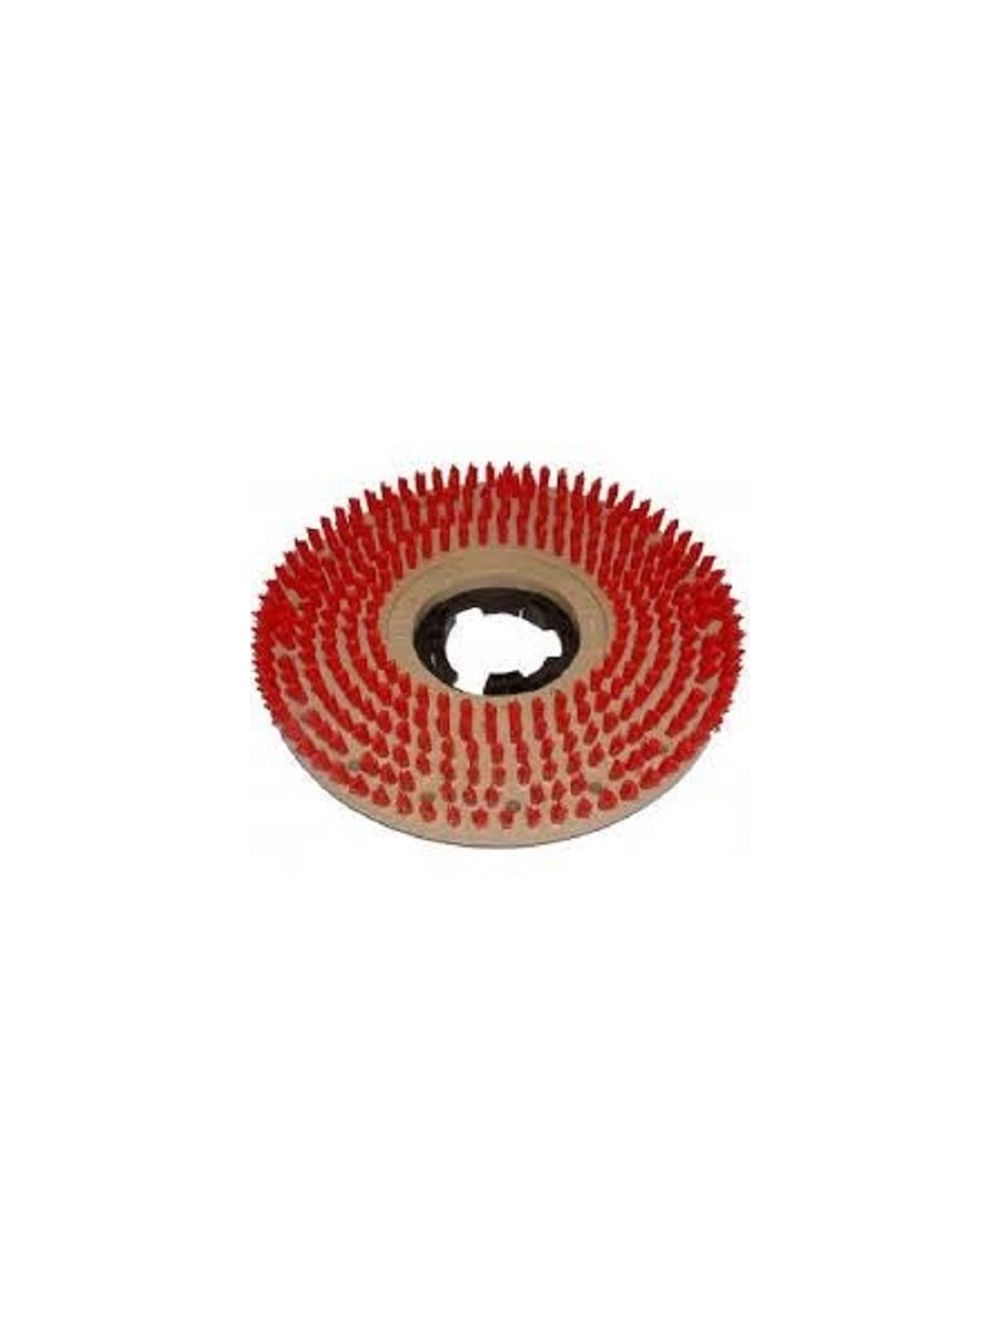 Truvox - OBS 35cm Pad driver with clutch plate (05-4620-0000)